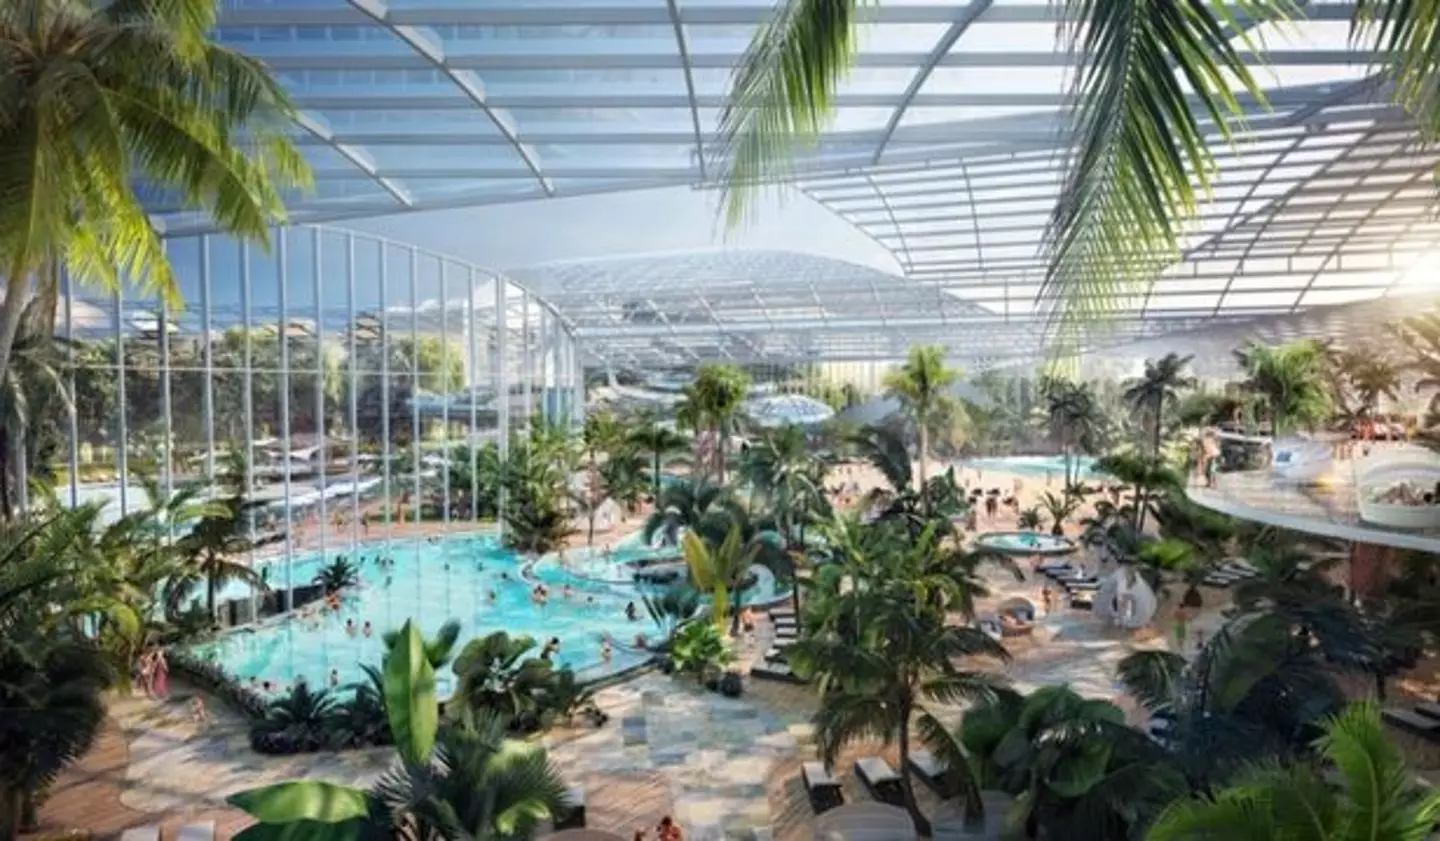 Therme Manchester will be the size of 19 football pitches.